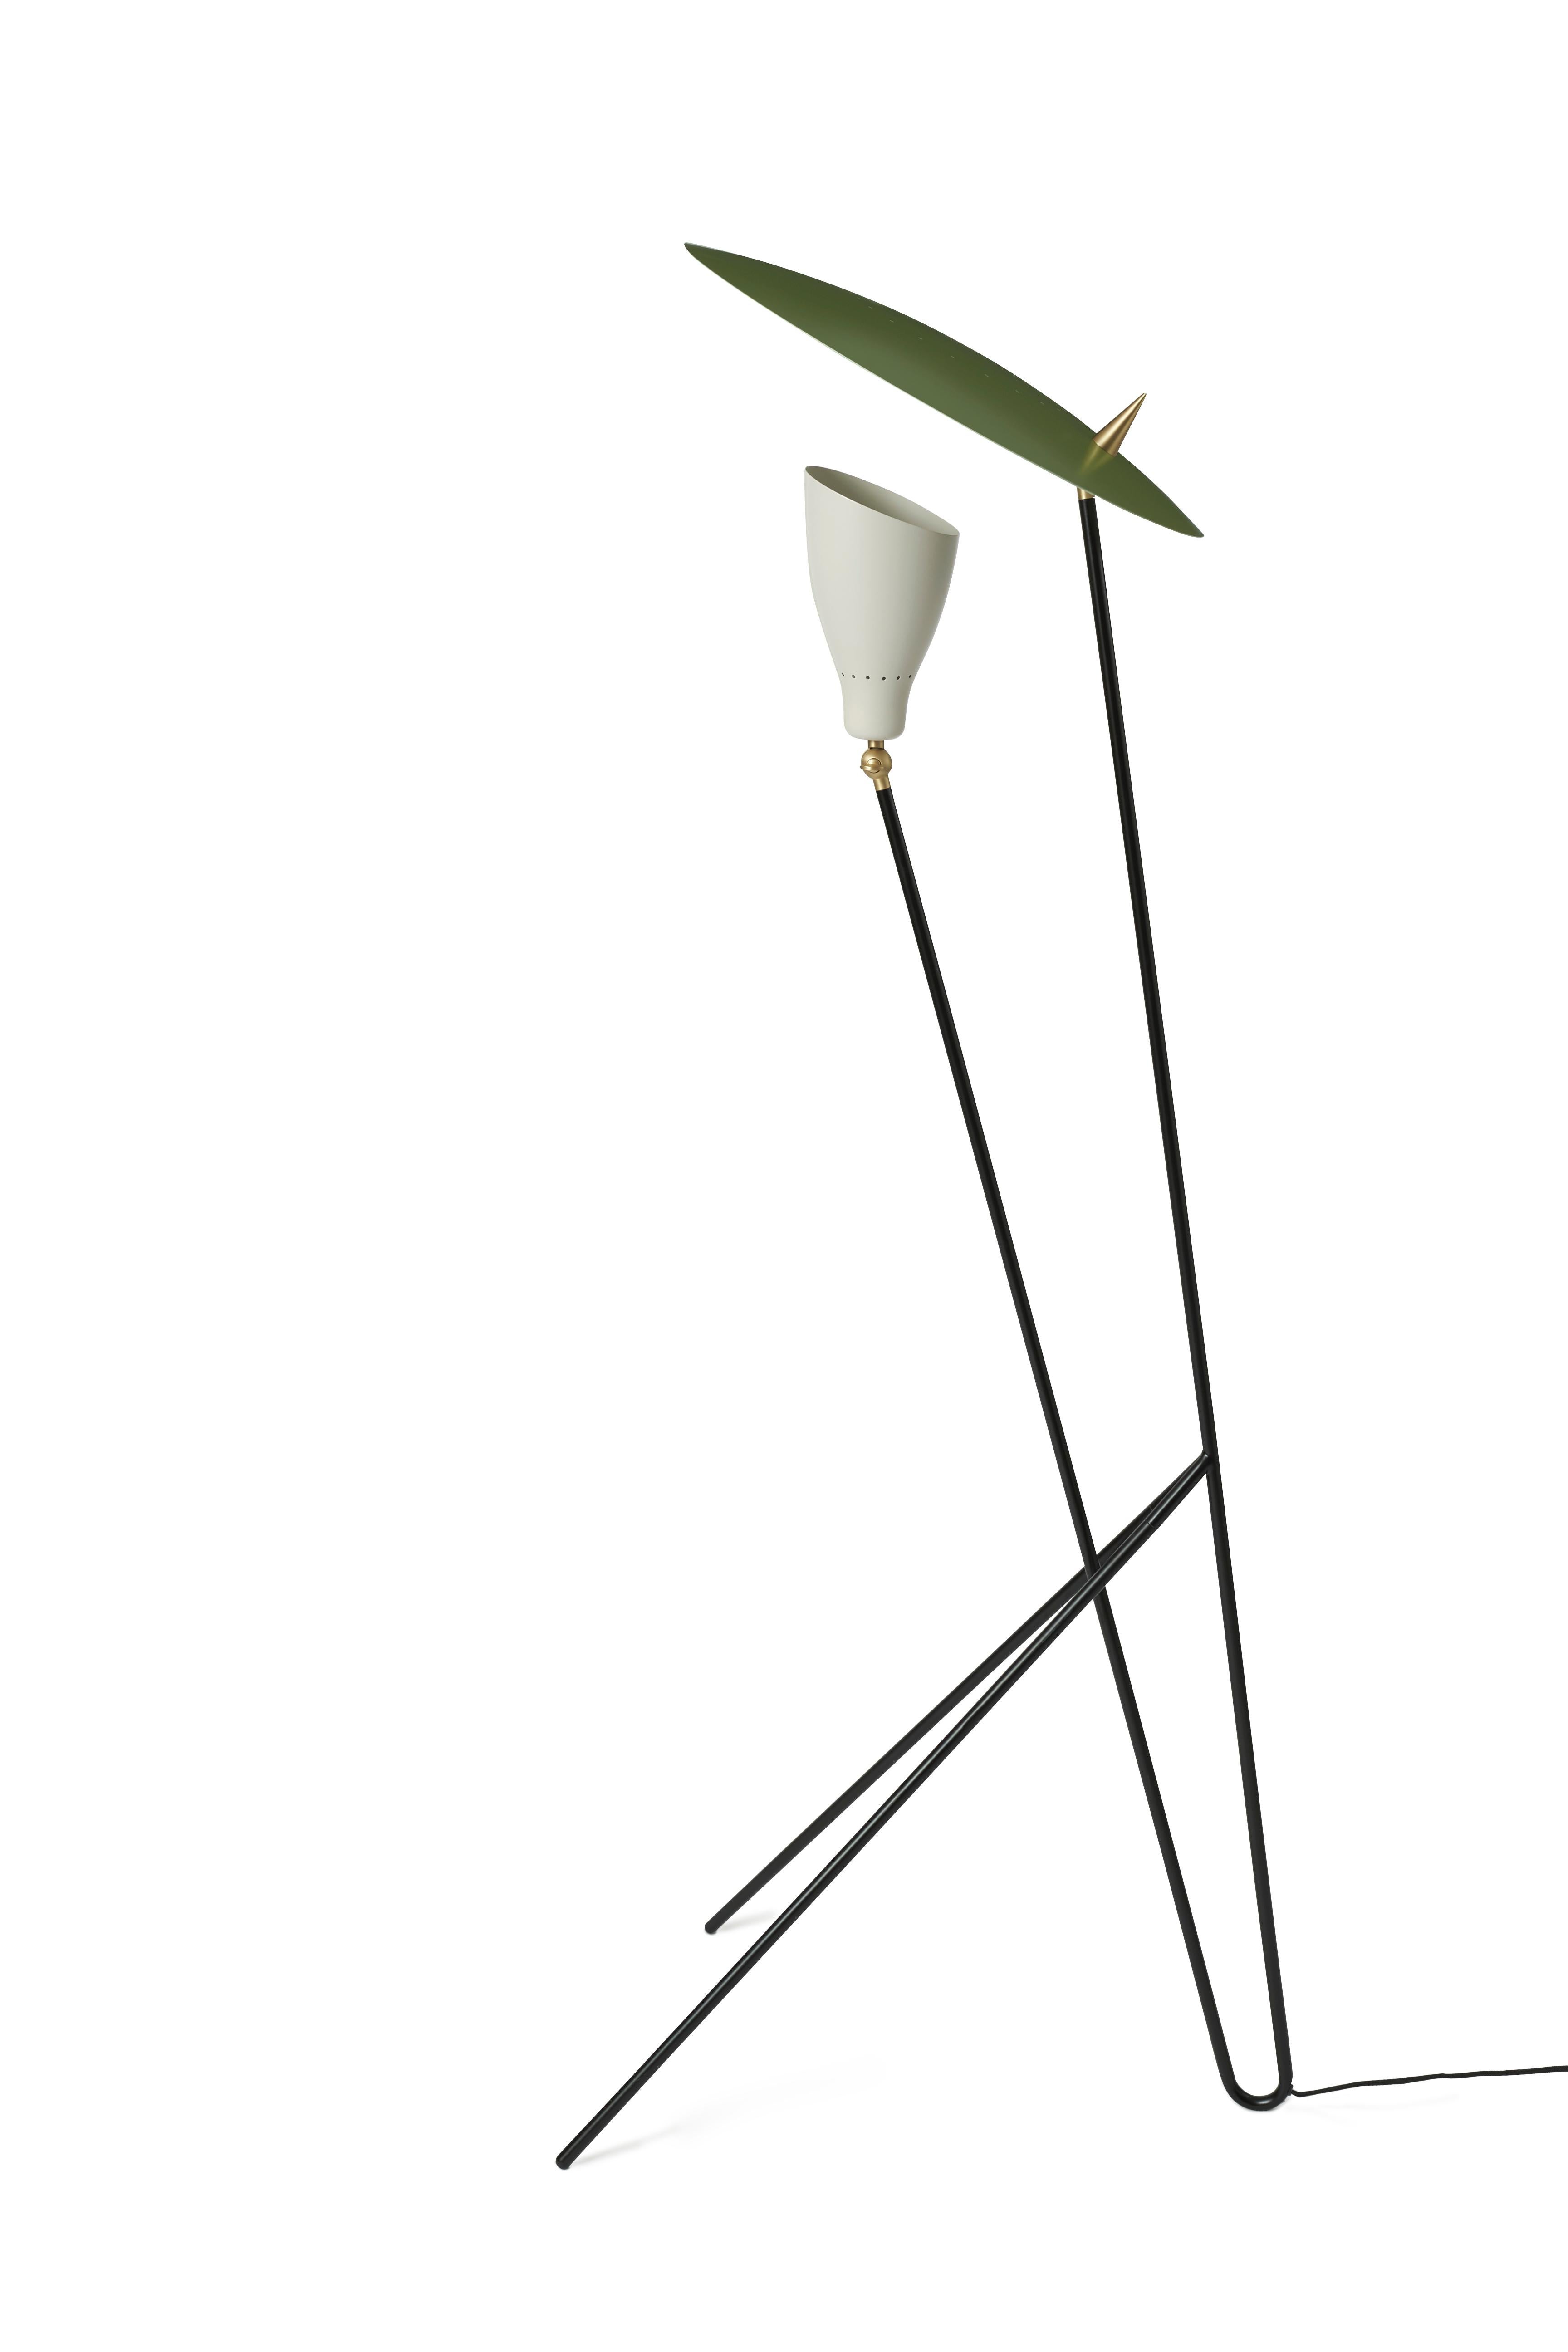 For Sale: Green (Pine Green/Warm White) Silhouette Floor Lamp, by Svend Aage Holm-Sørensen from Warm Nordic